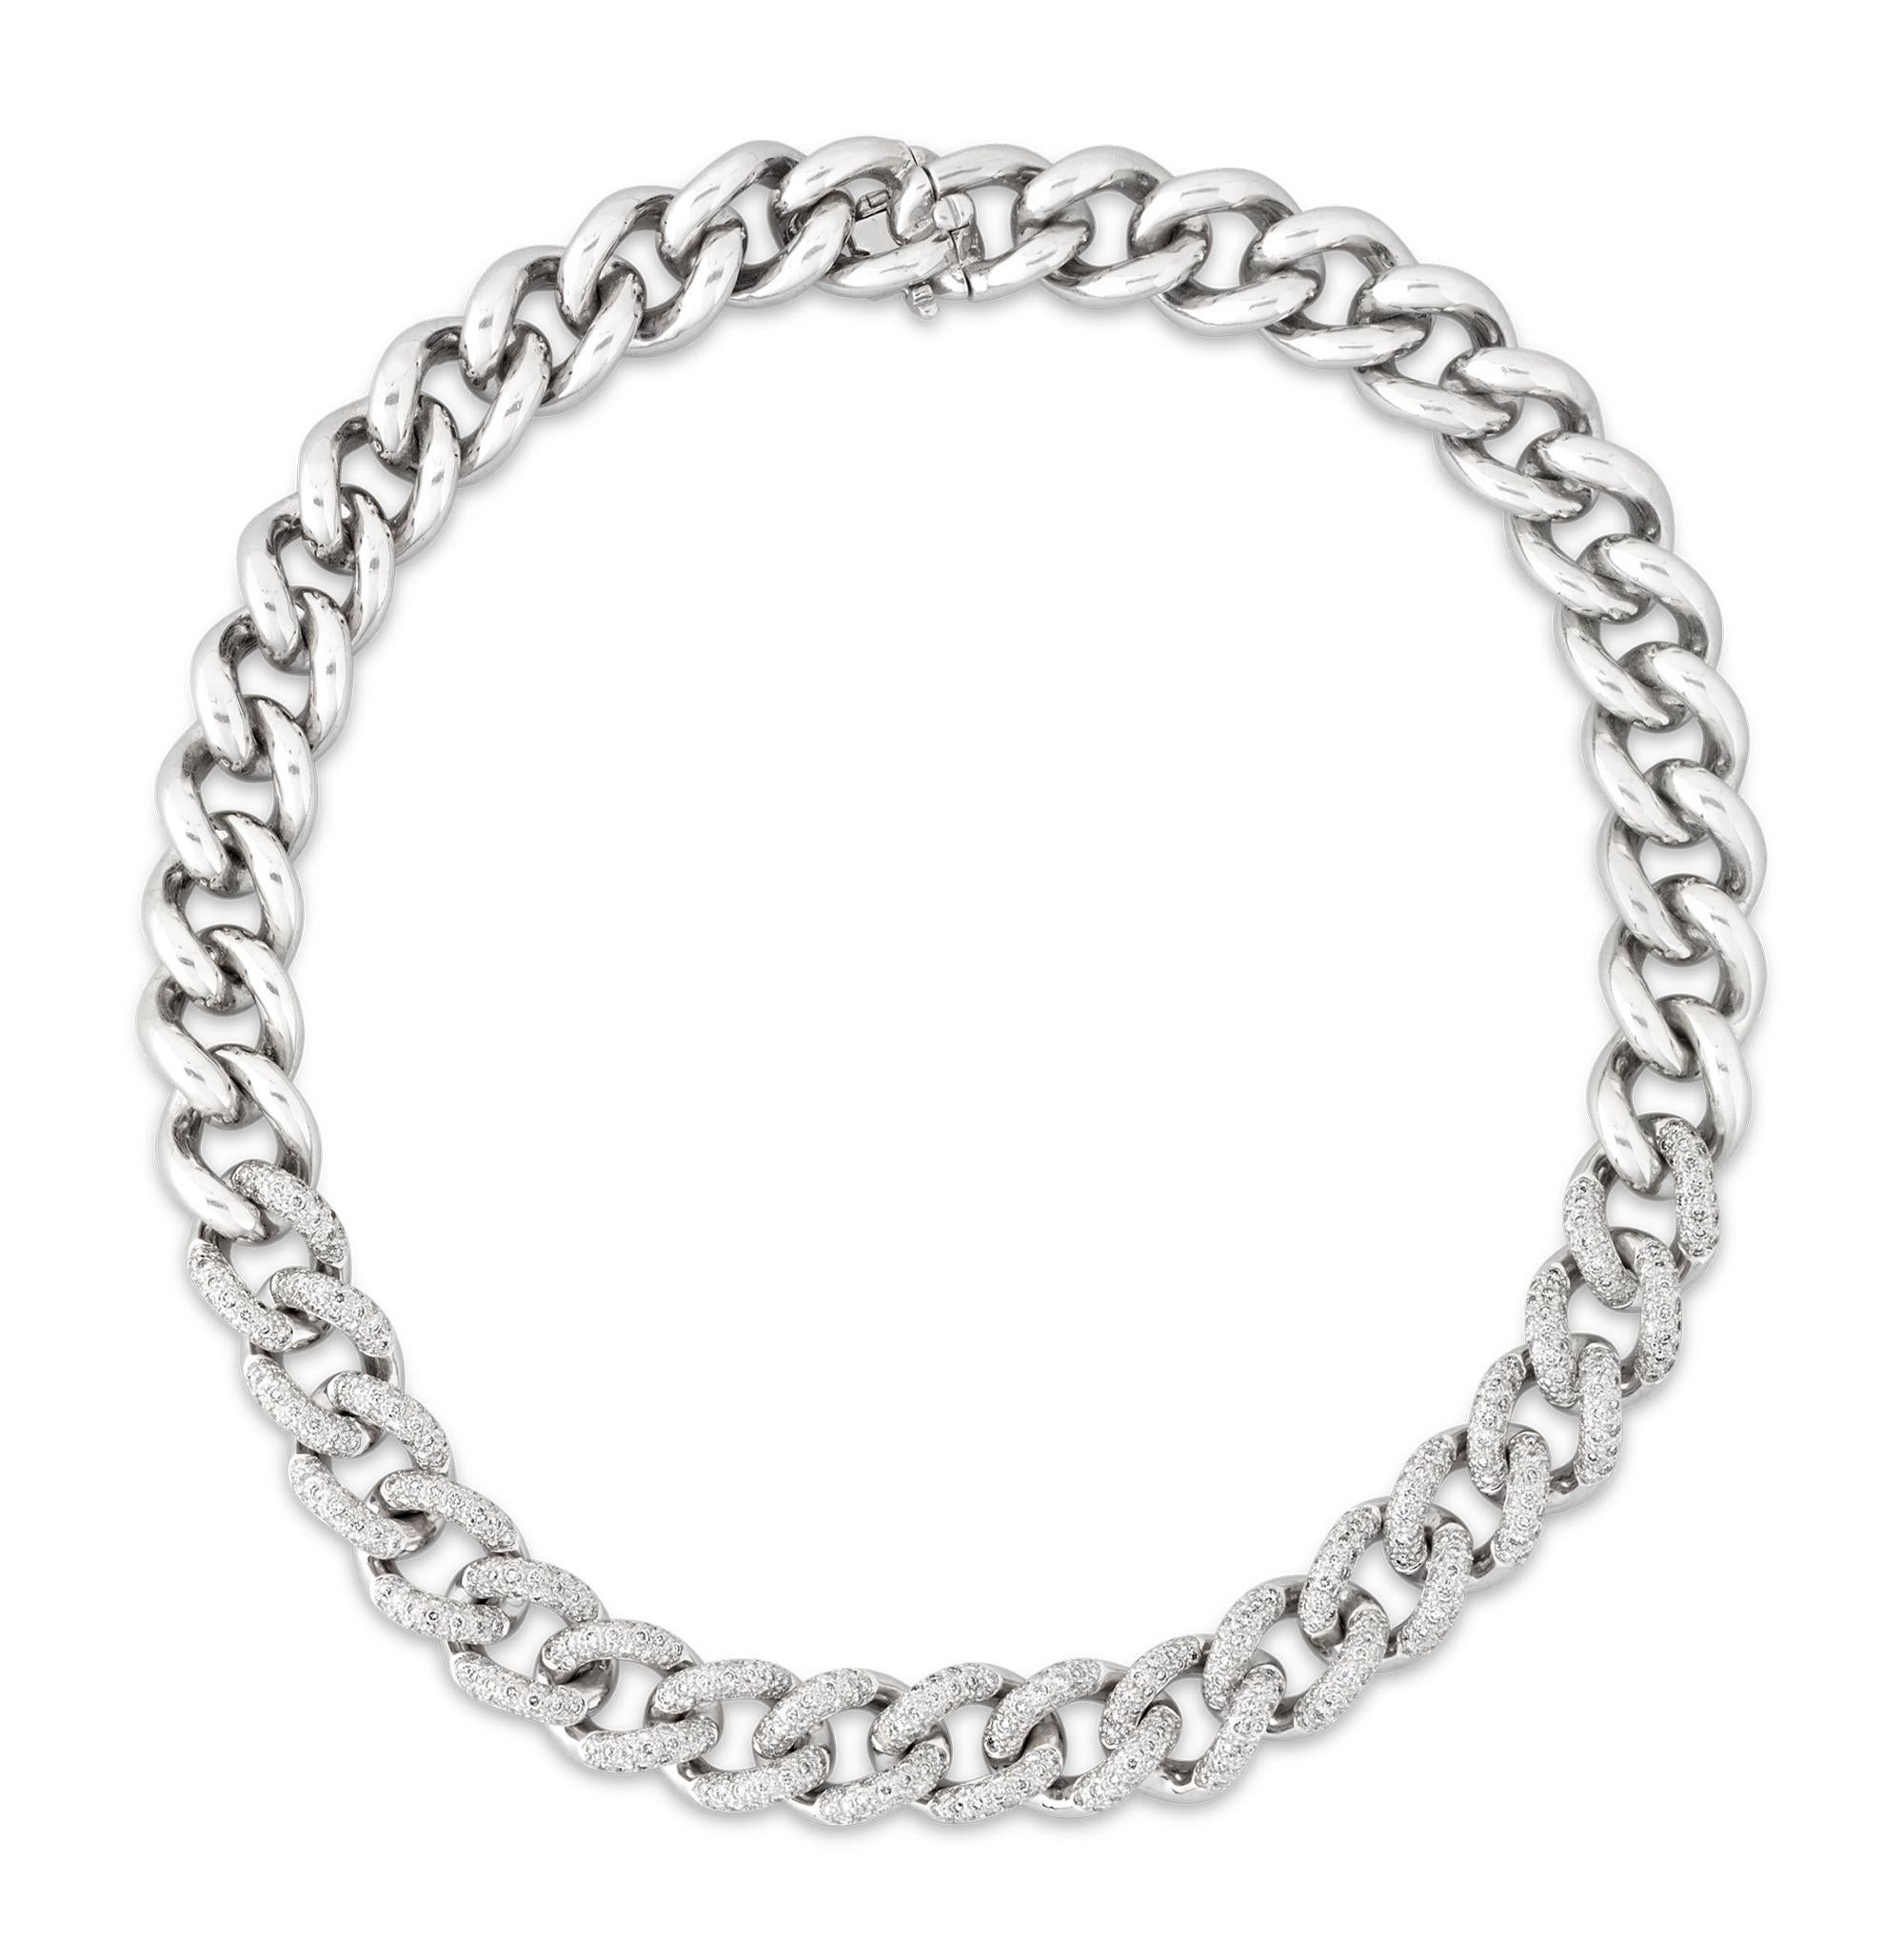 Modern White Gold Chain Necklace With Pavé Diamonds, 3.95 Carats